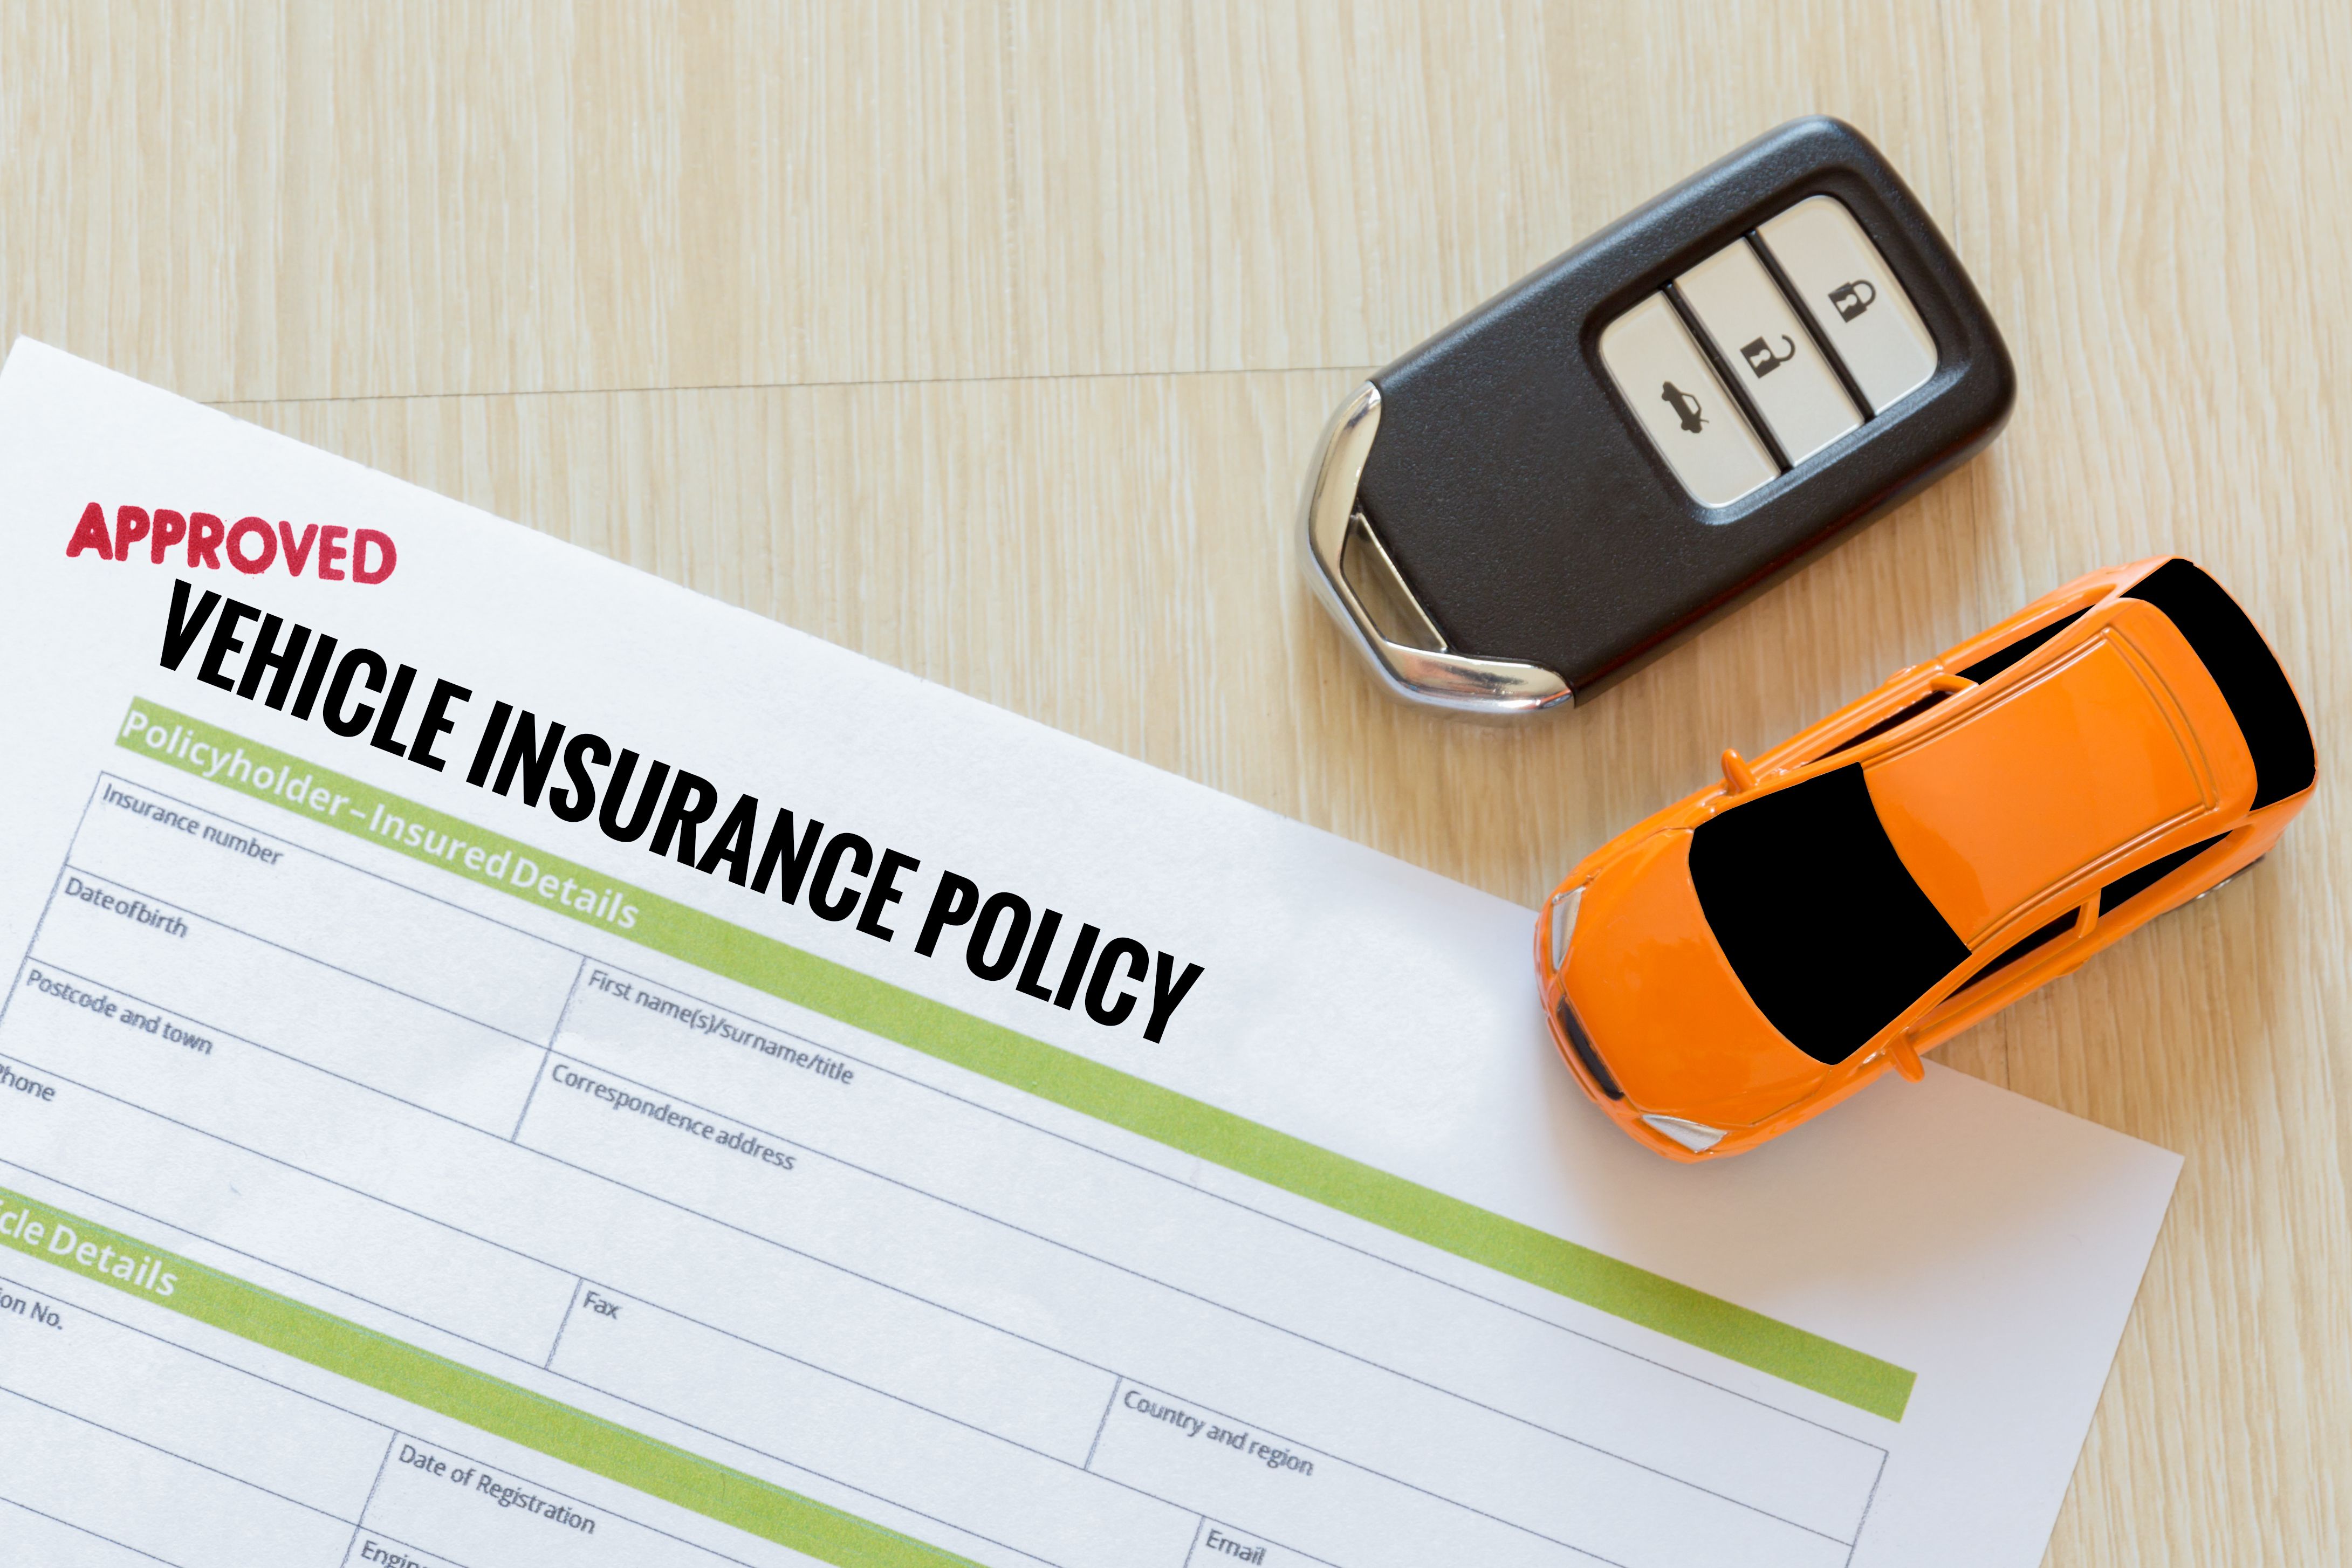 Exactly How To Obtain Cheap Car Insurance The Quick And Easy Way